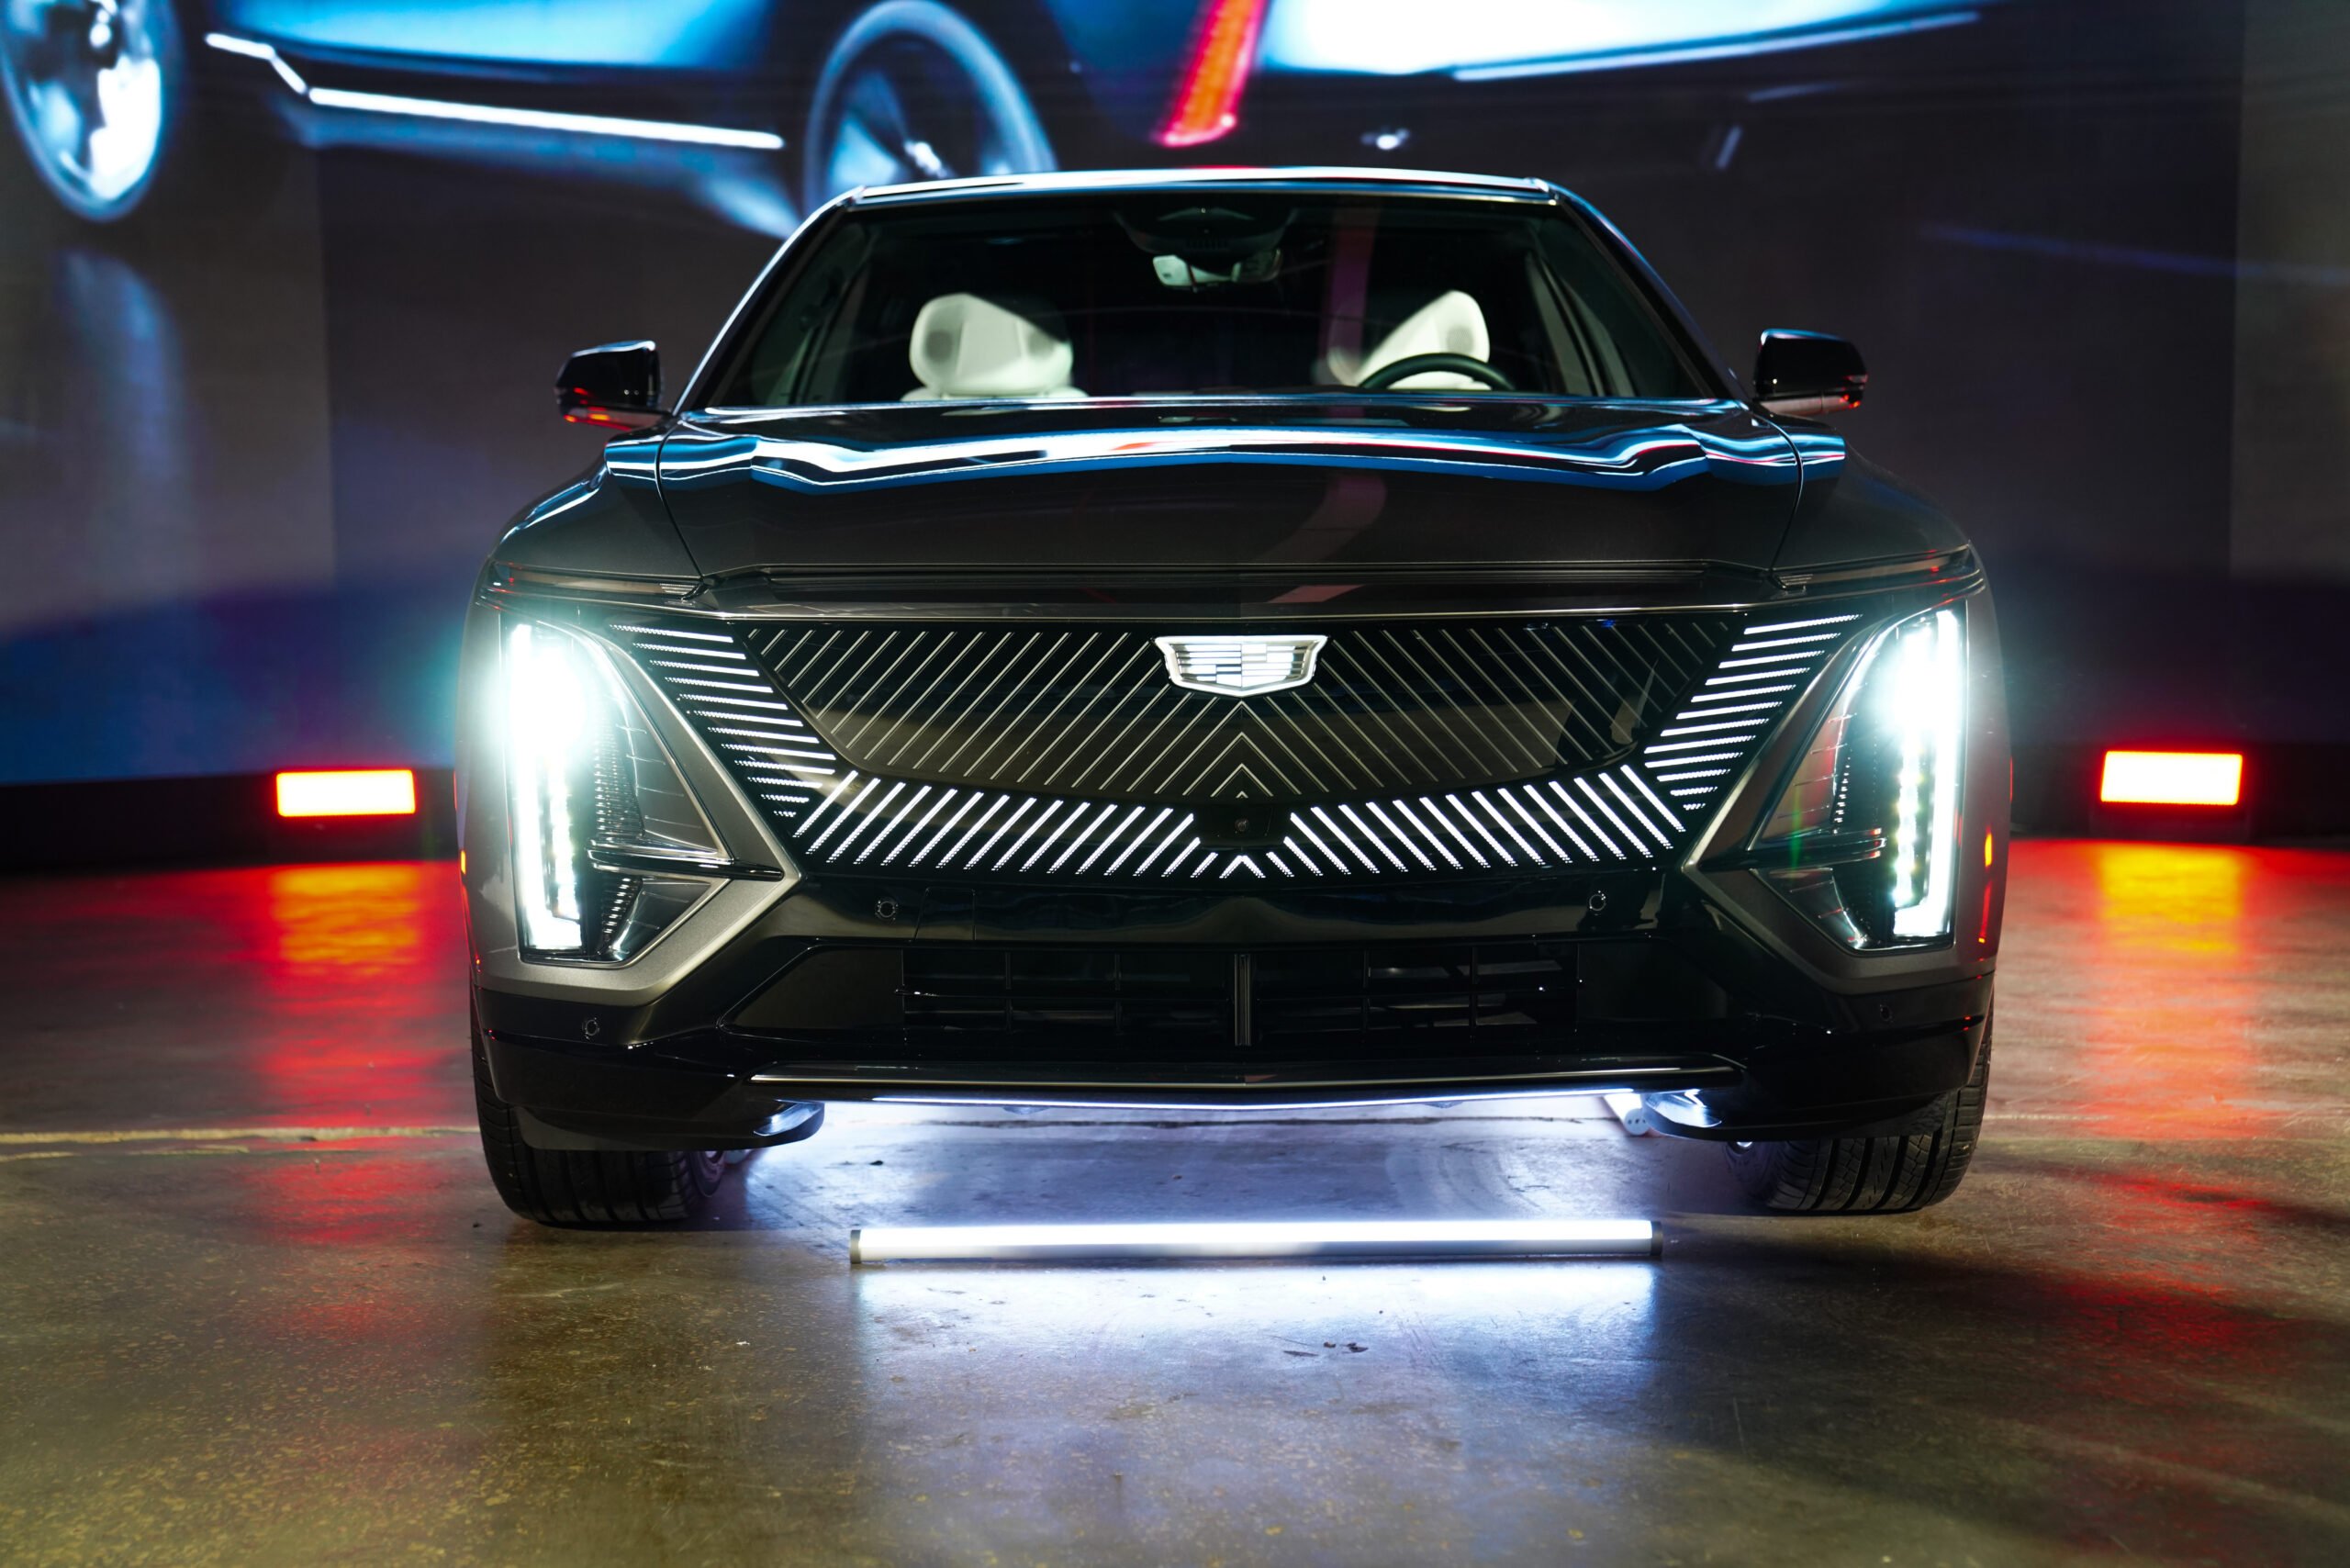 CADILLAC OUTLINES COMMITMENT TO THE MOBILITY ASPIRATION OF THE REGION BY CONFIRMING SIX LUXURY ELECTRIC VEHICLES BY 2025